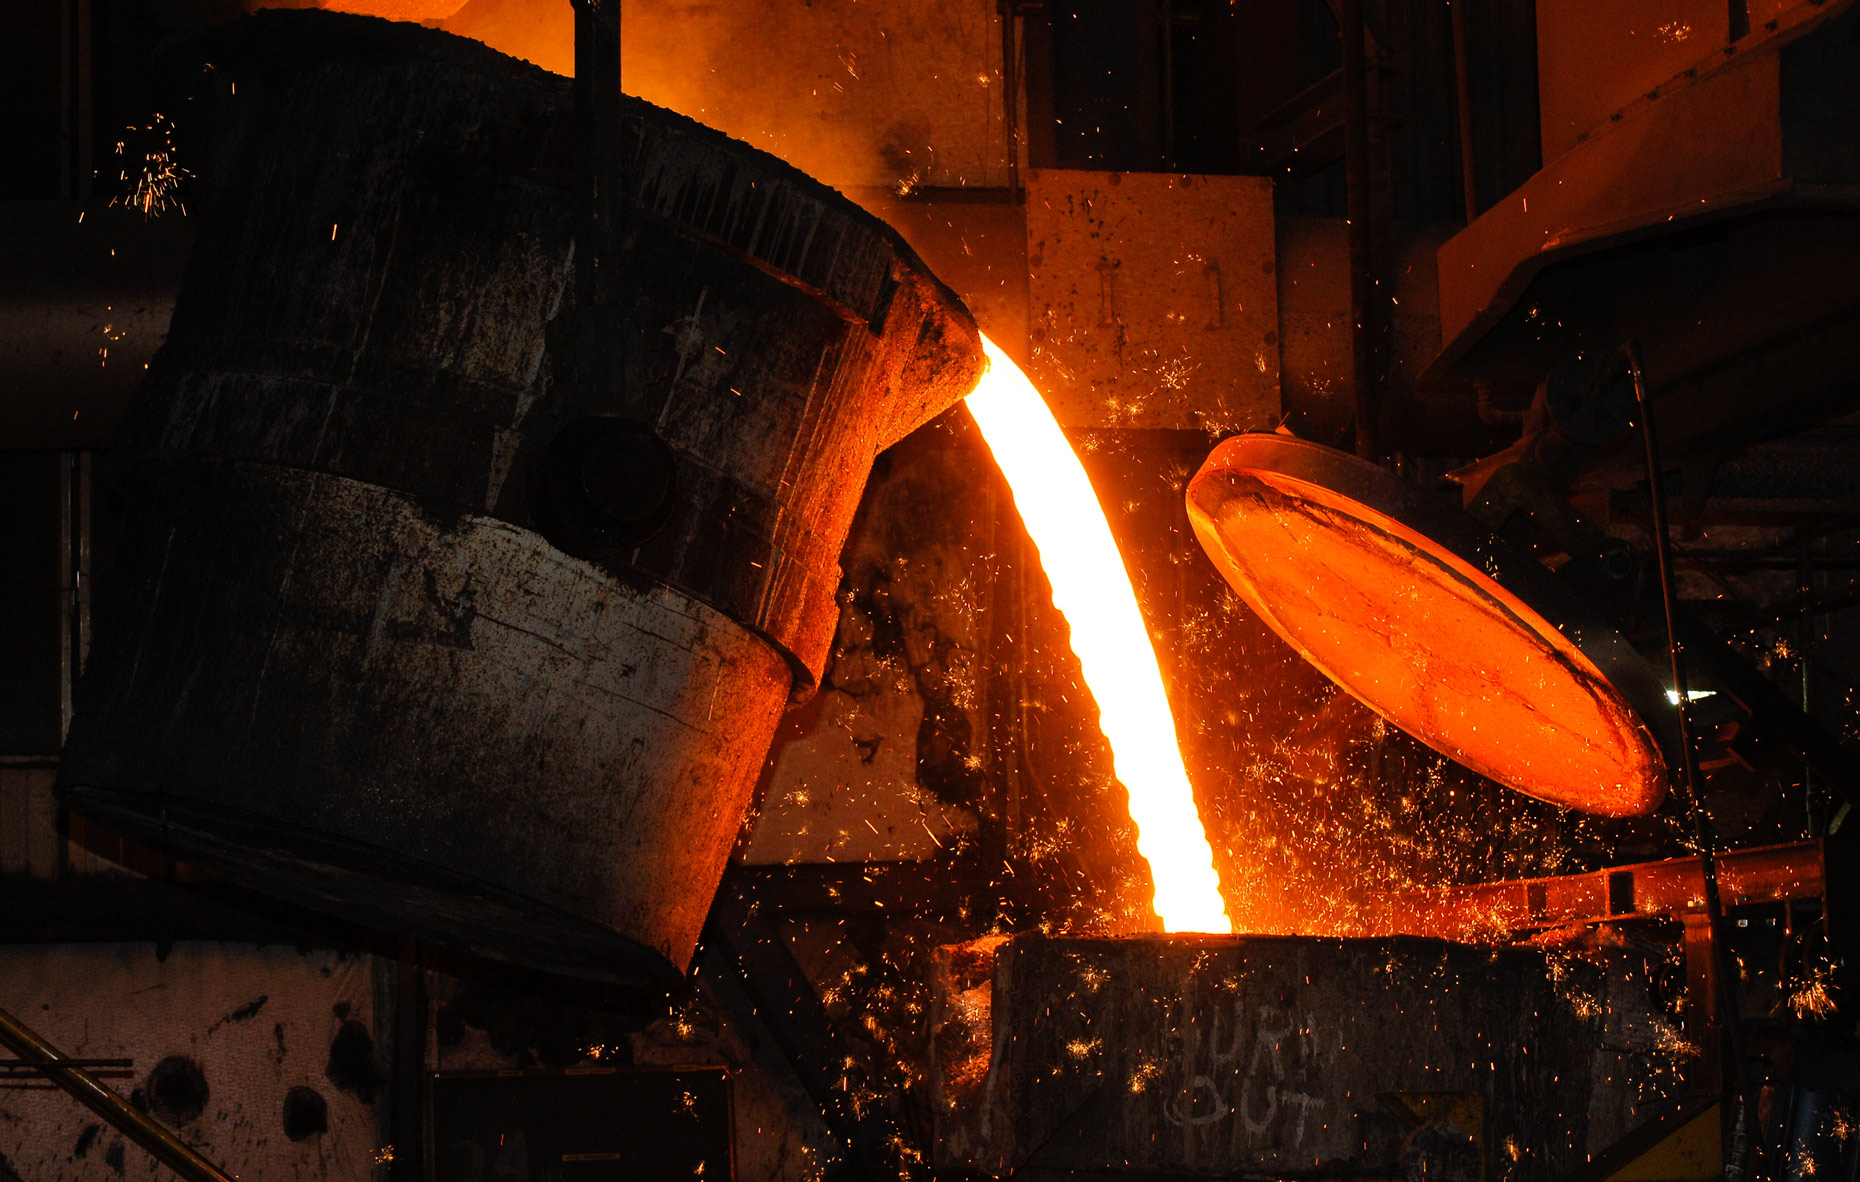 Molten steel at Tyler Pipe in Tyler, Texas photographed by industrial photographer Kevin Brown.